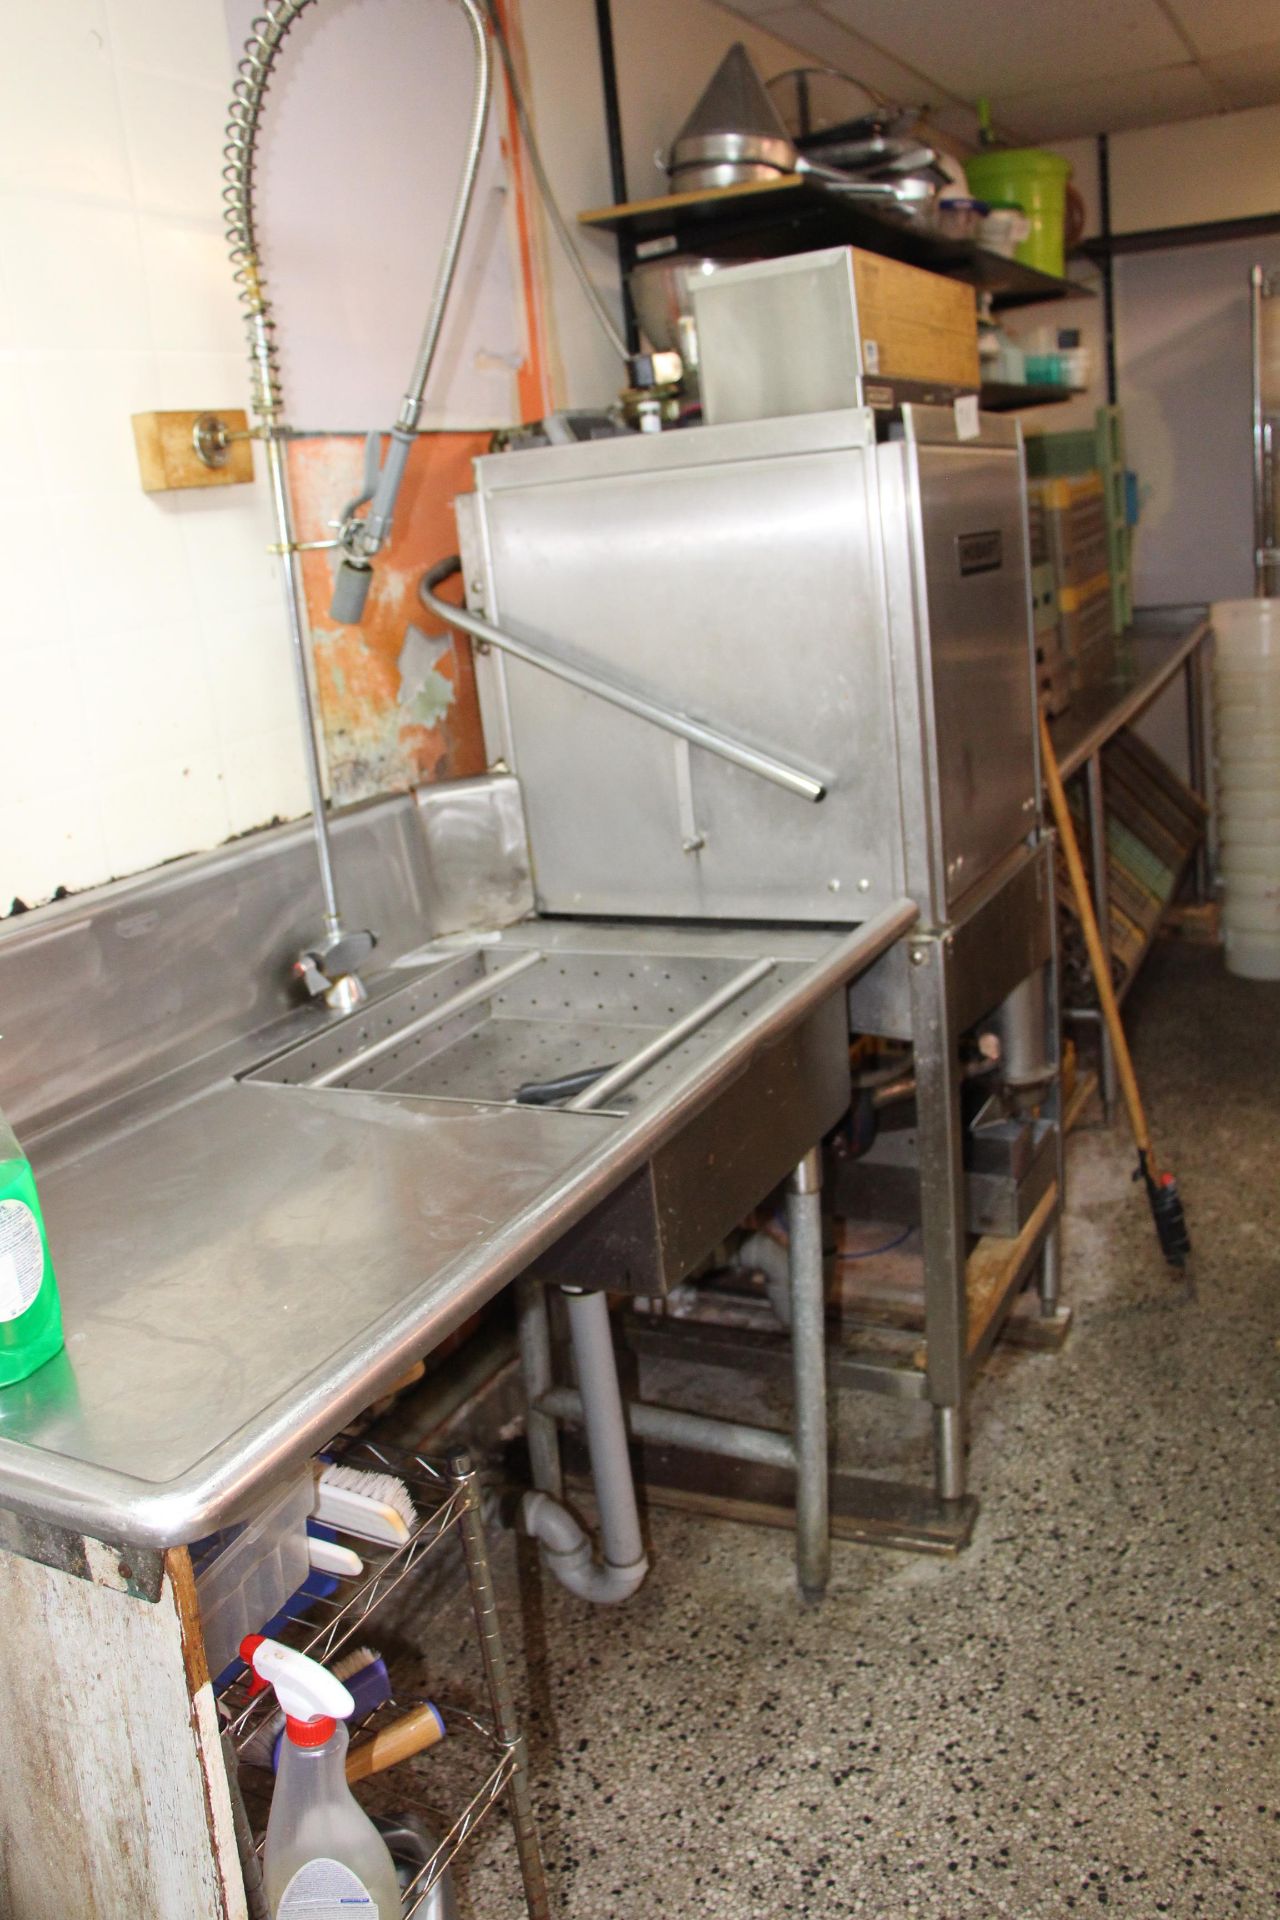 Hobart pass thru dishwasher c/w infeed s/s table and outflow s/s table w/sink and sprayer